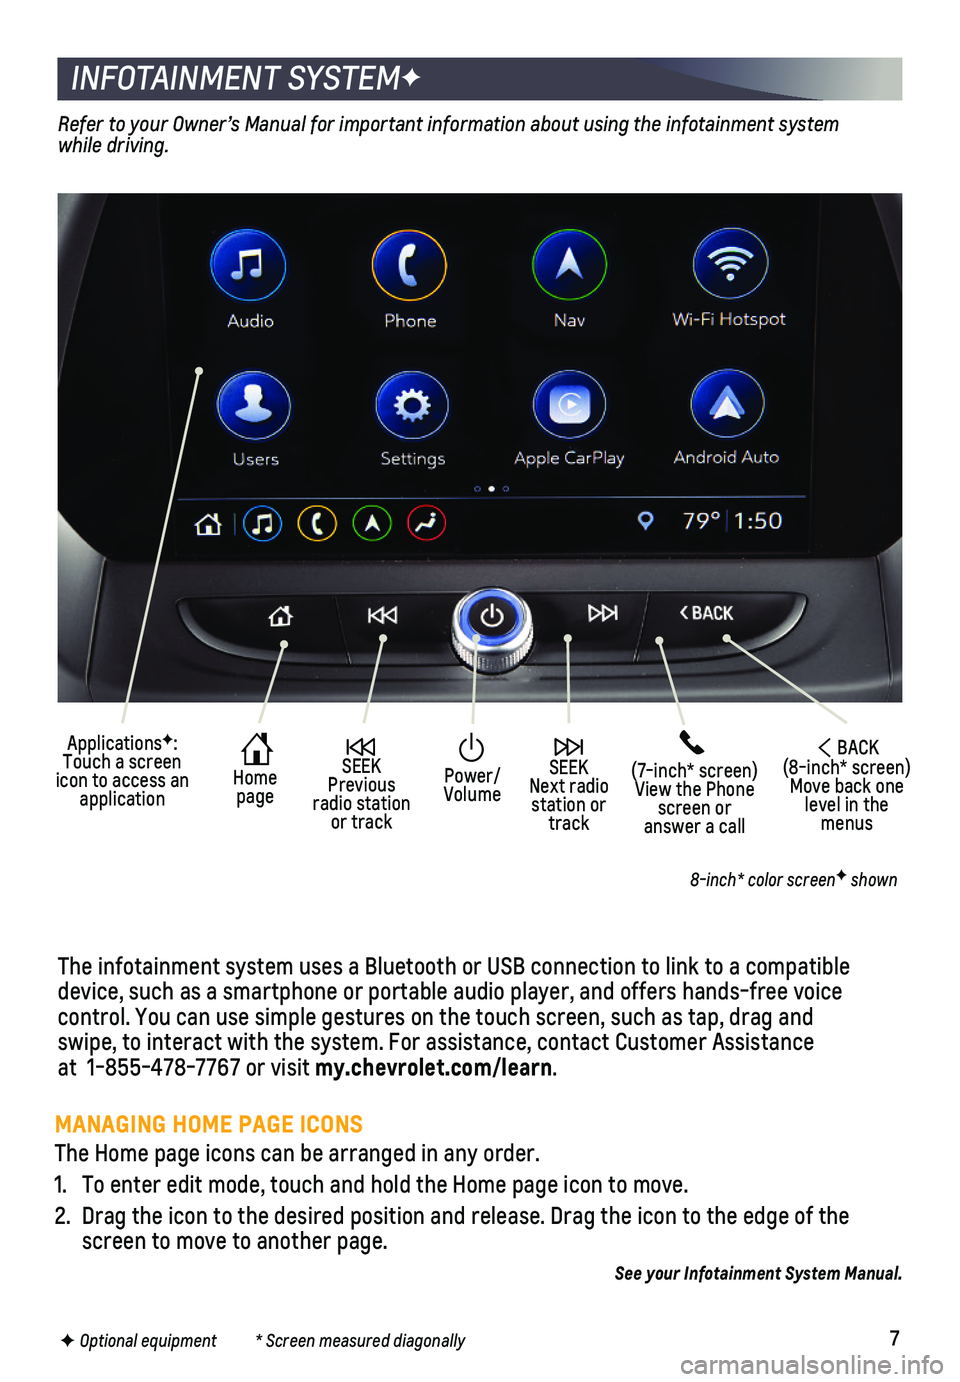 CHEVROLET CAMARO 2020  Owners Manual 7
INFOTAINMENT SYSTEMF
The infotainment system uses a Bluetooth or USB connection to link to a \
compatible device, such as a smartphone or portable audio player, and offers hands-\
free voice  
contr